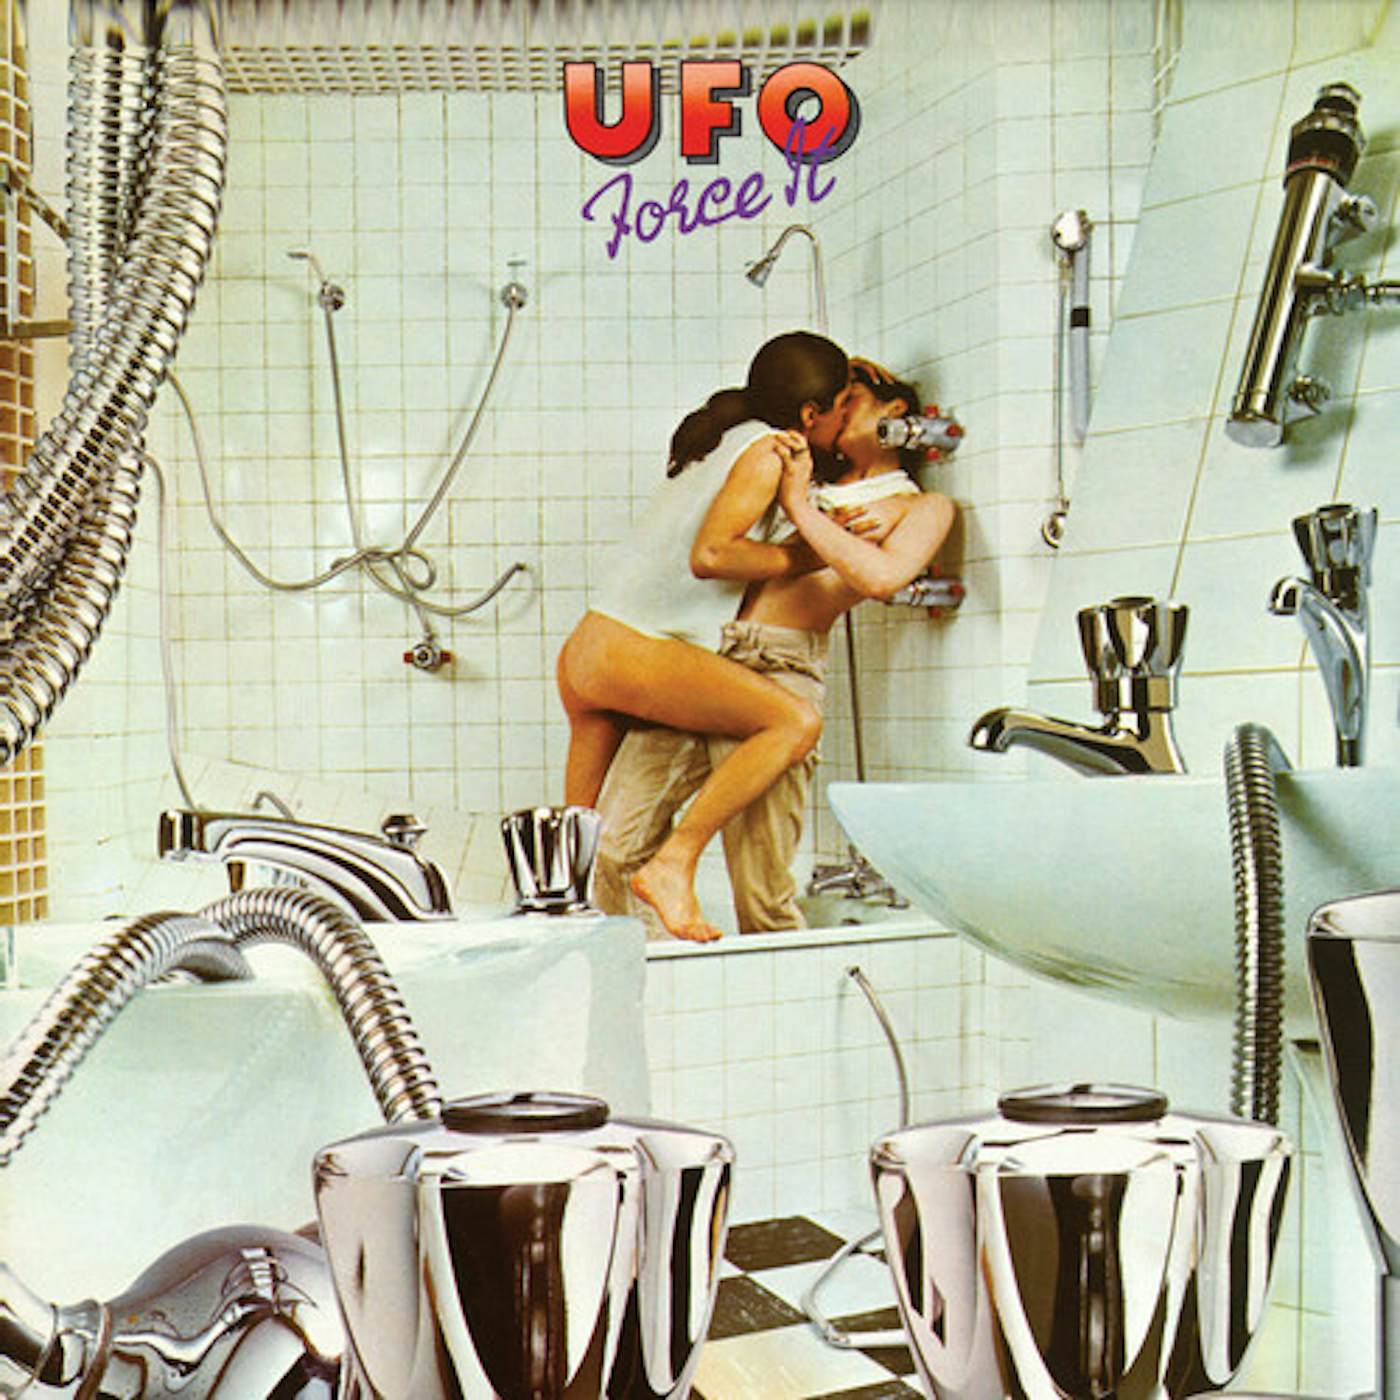 UFO Force It (Deluxe Edition) Vinyl Record